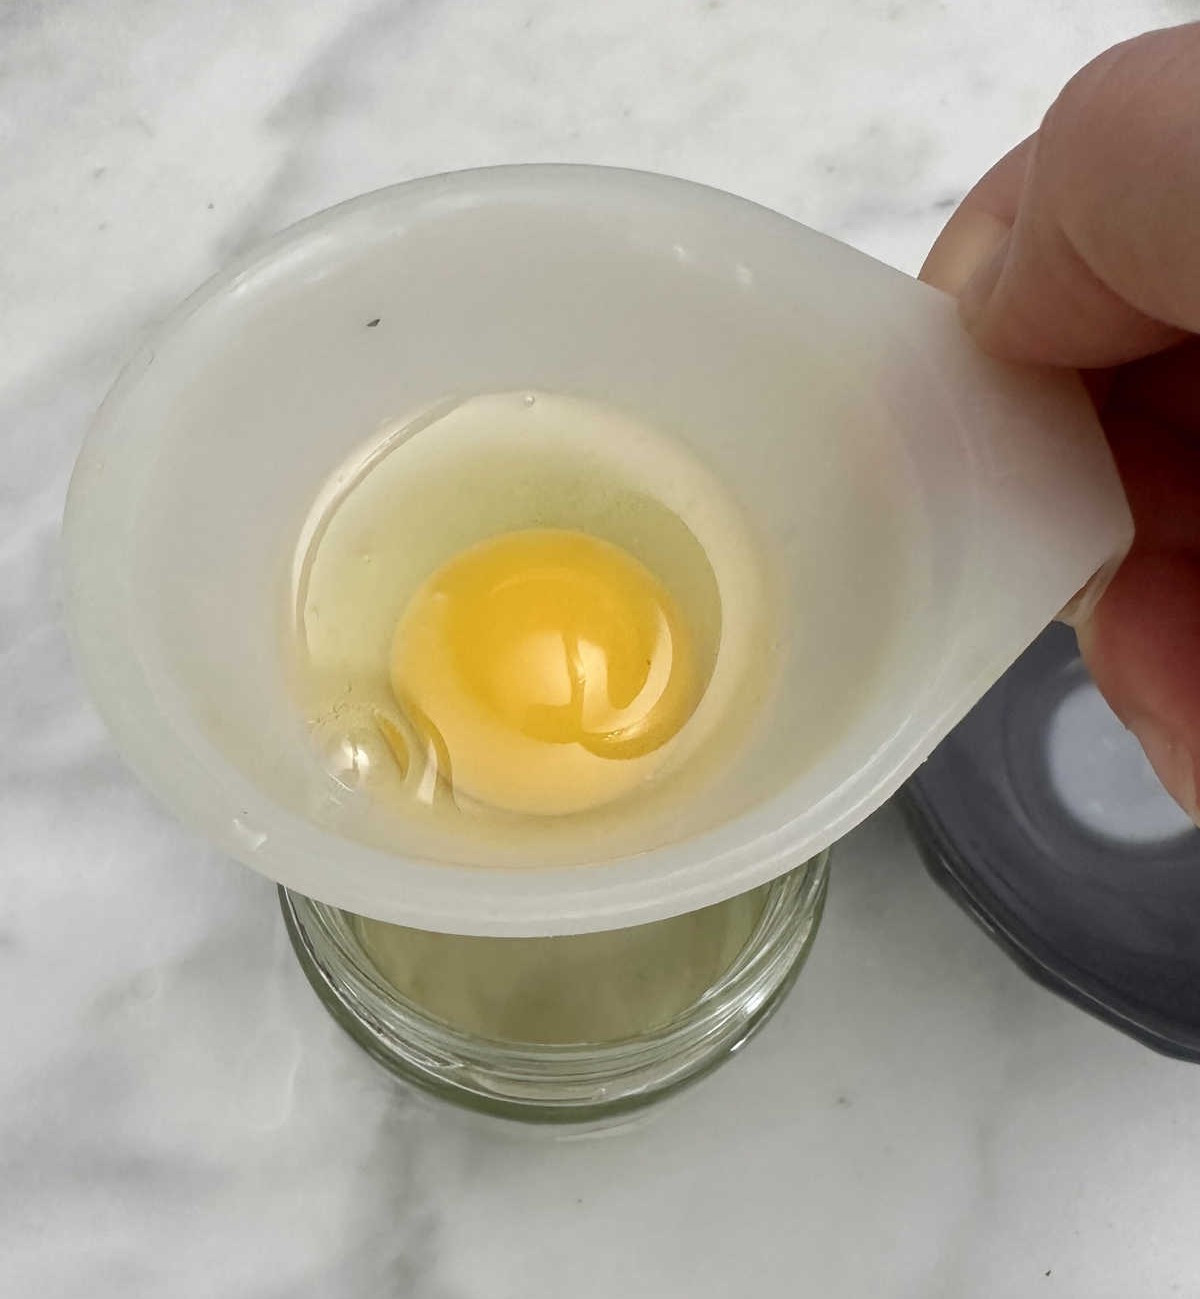 Use a Funnel to Separate the Yolk from the Egg White